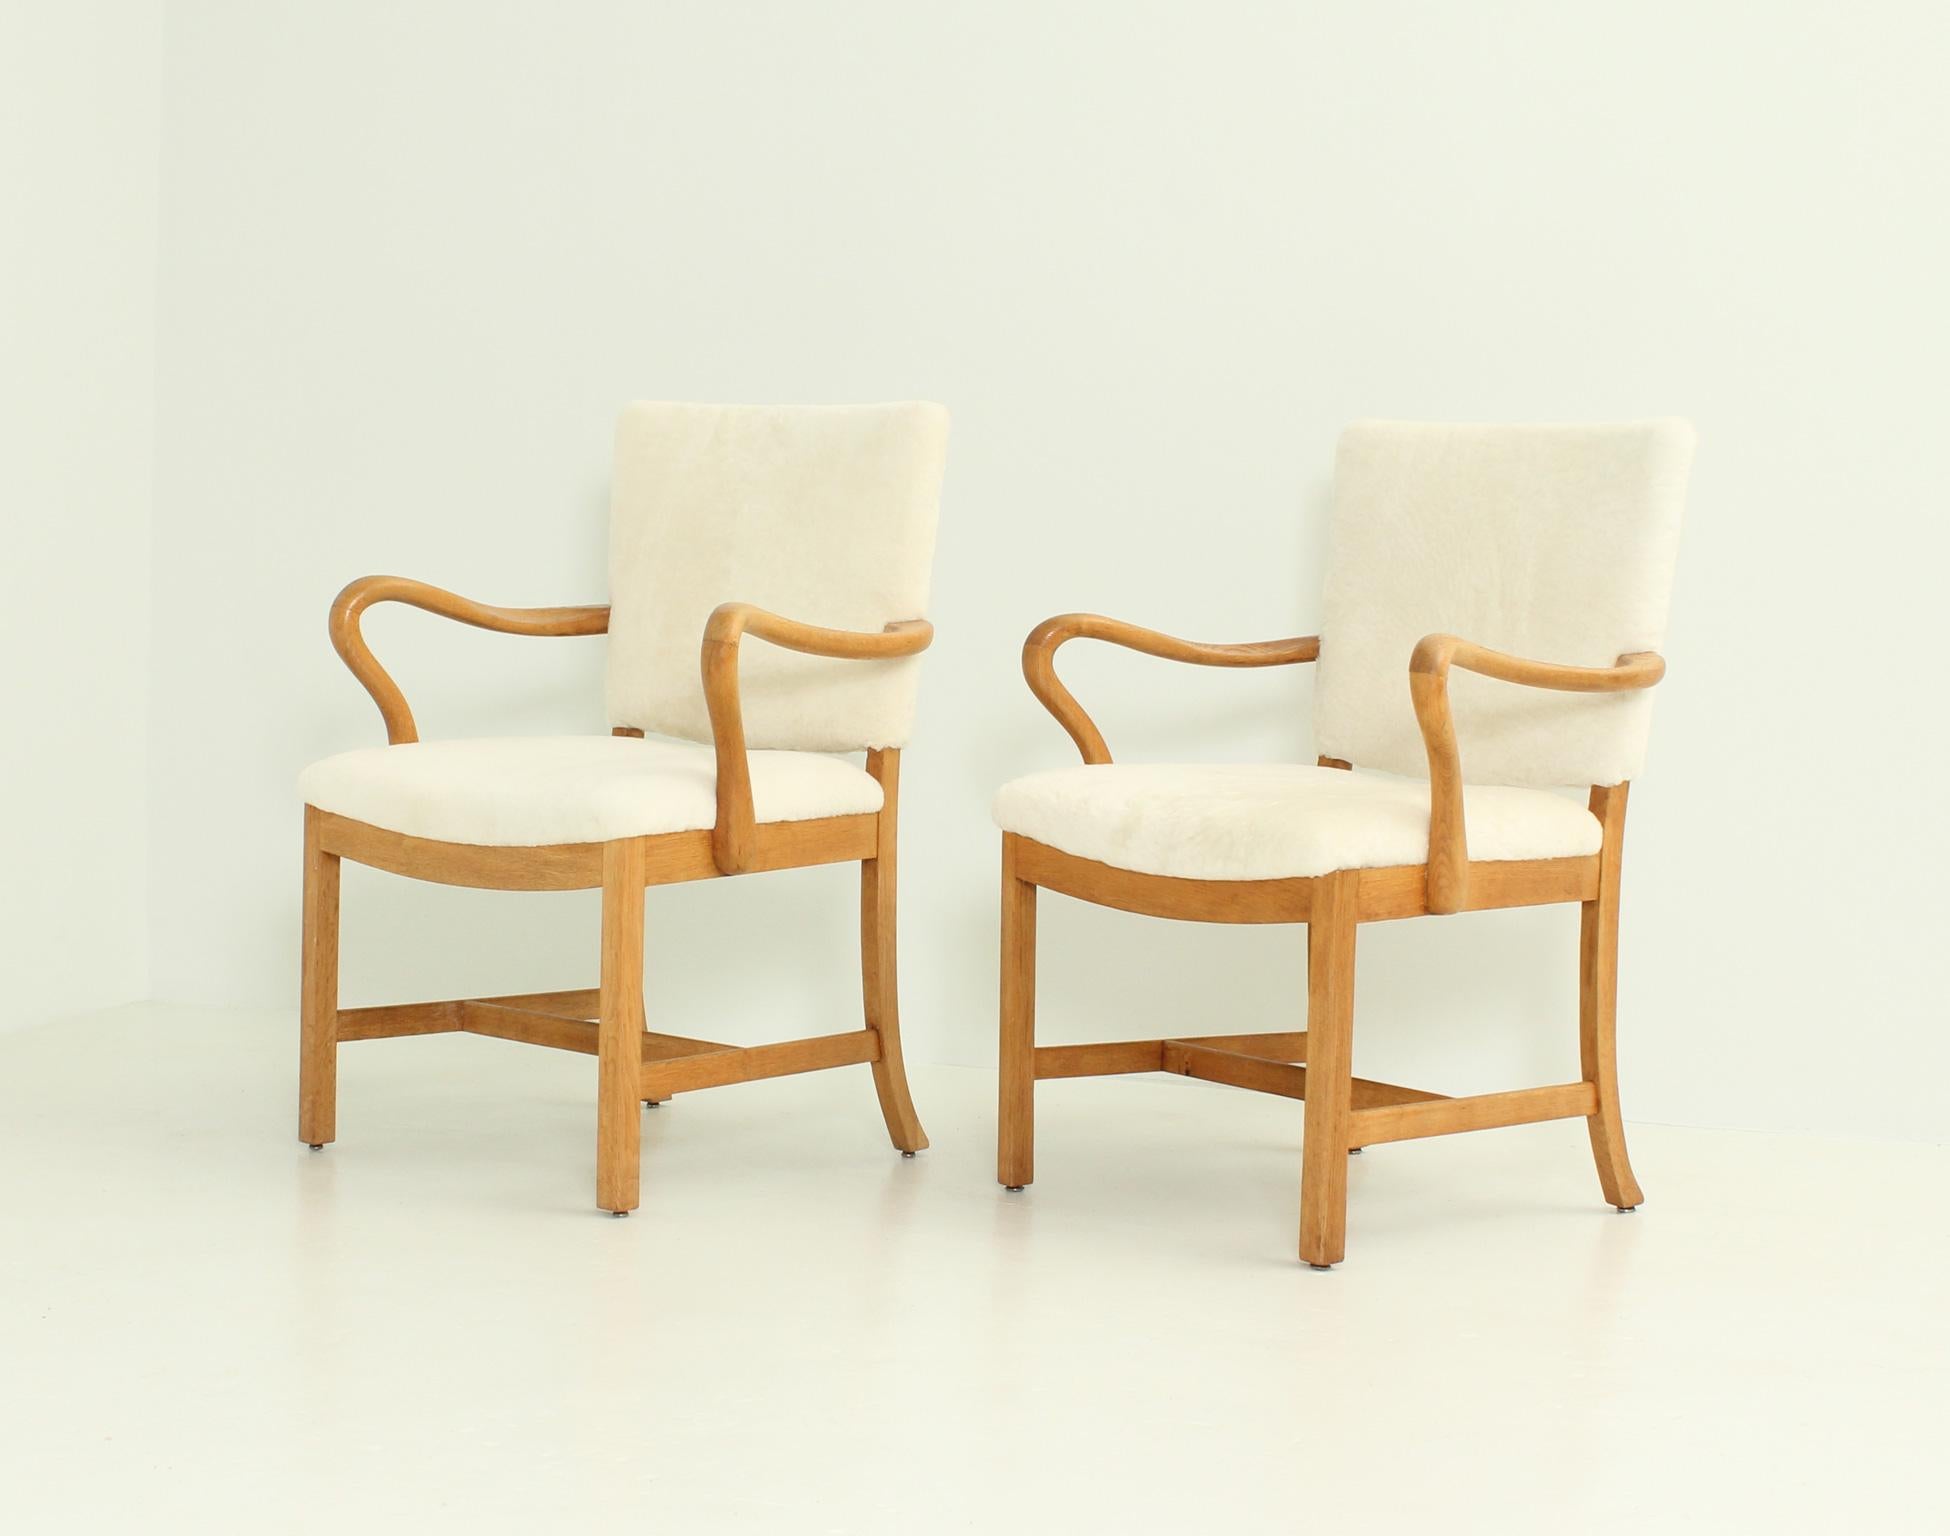 Pair of armchairs designed in 1930's by danish cabinetmaker Jacob Kjaer, Denmark. Interesting hand carver work in solid oak wood and re-upholstered with new sheepskin.